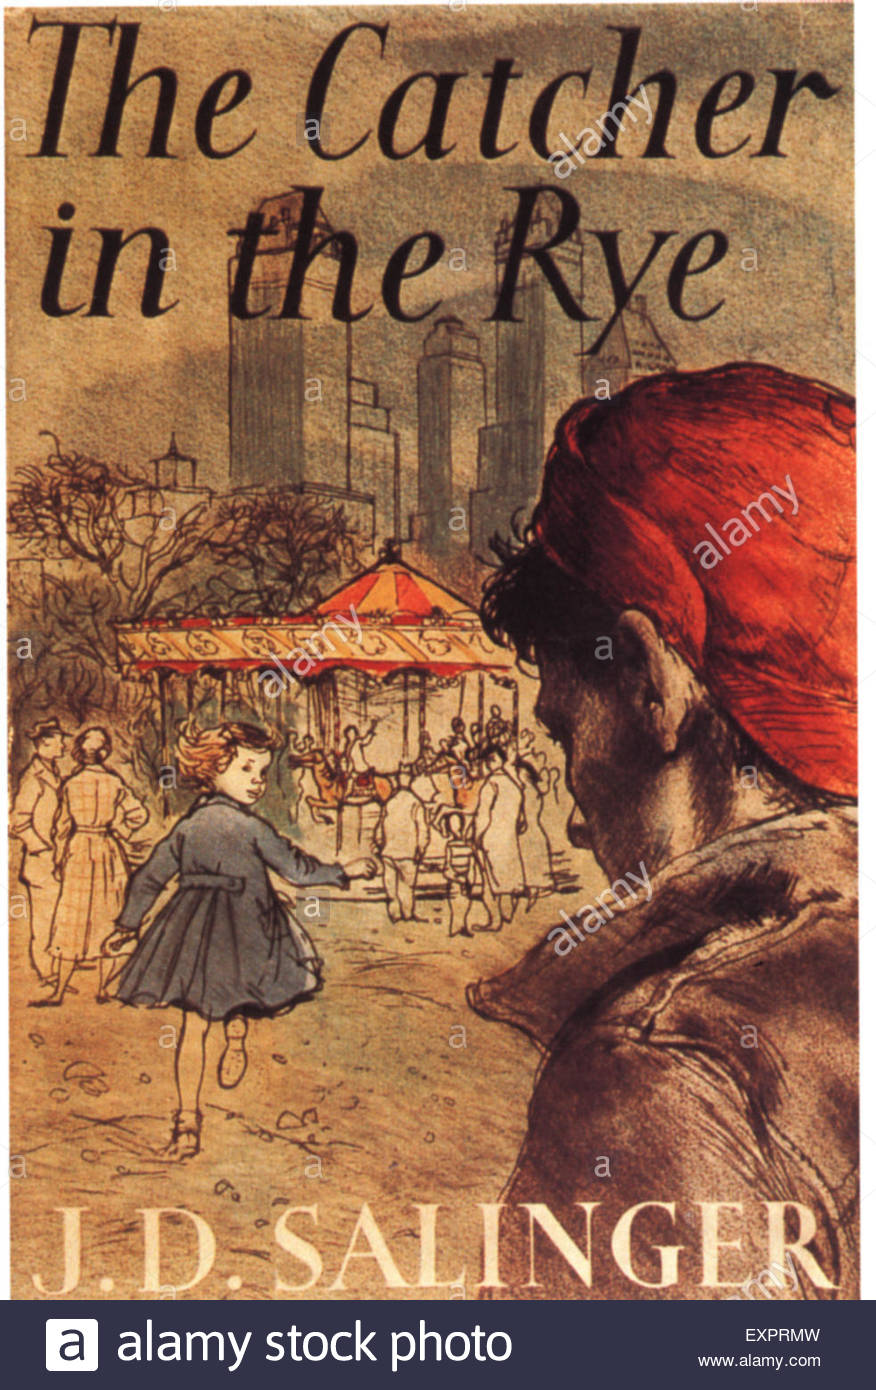 Literary analysis essay on the catcher in the rye